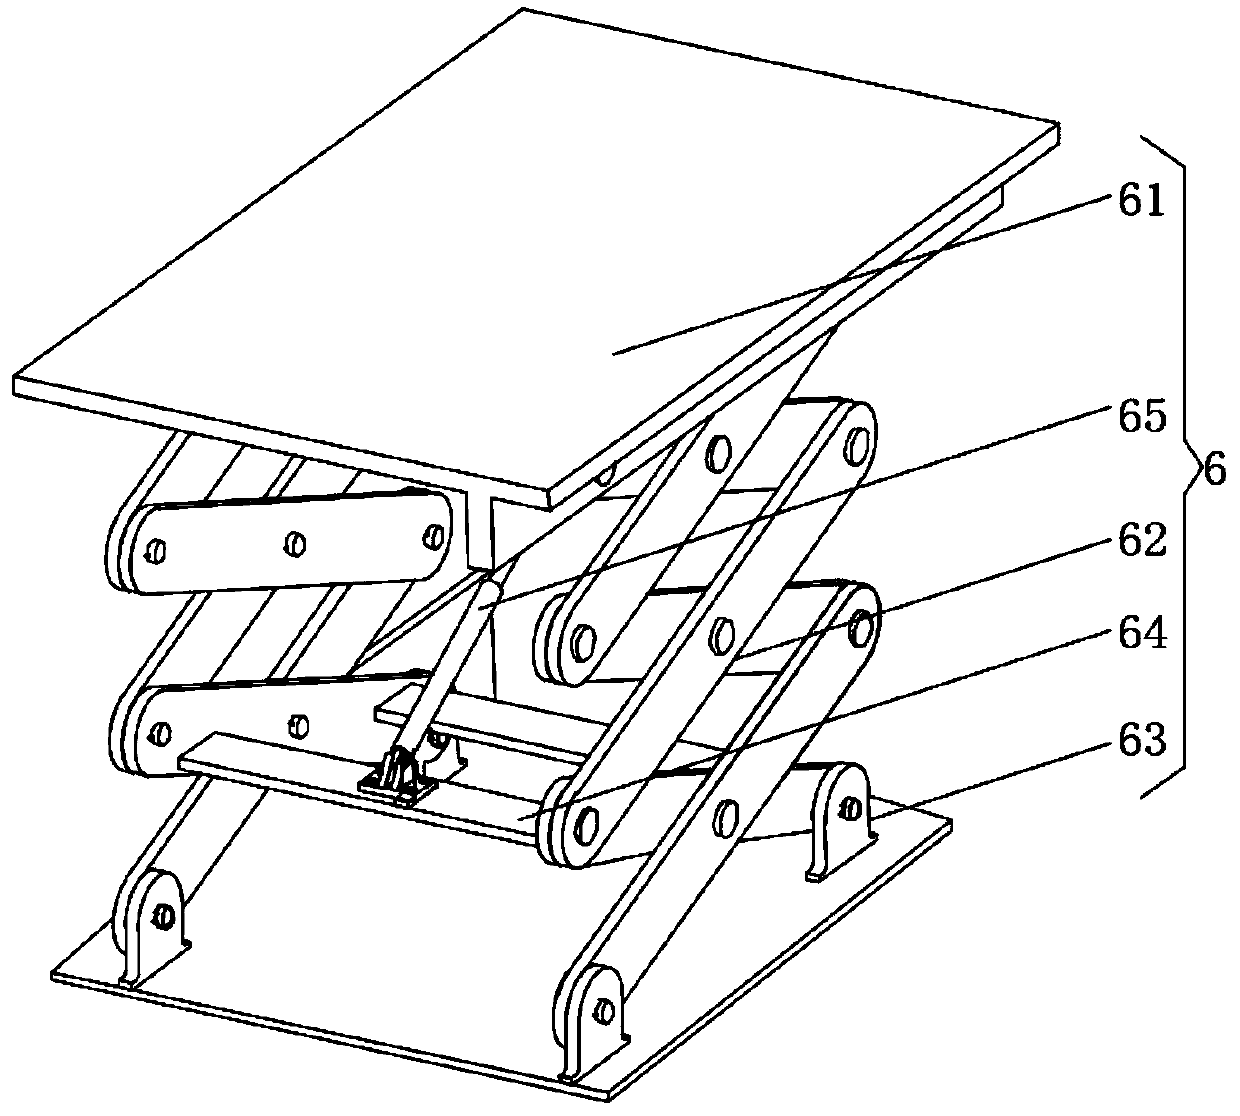 Integrated recovery equipment for waste integrated circuit plates